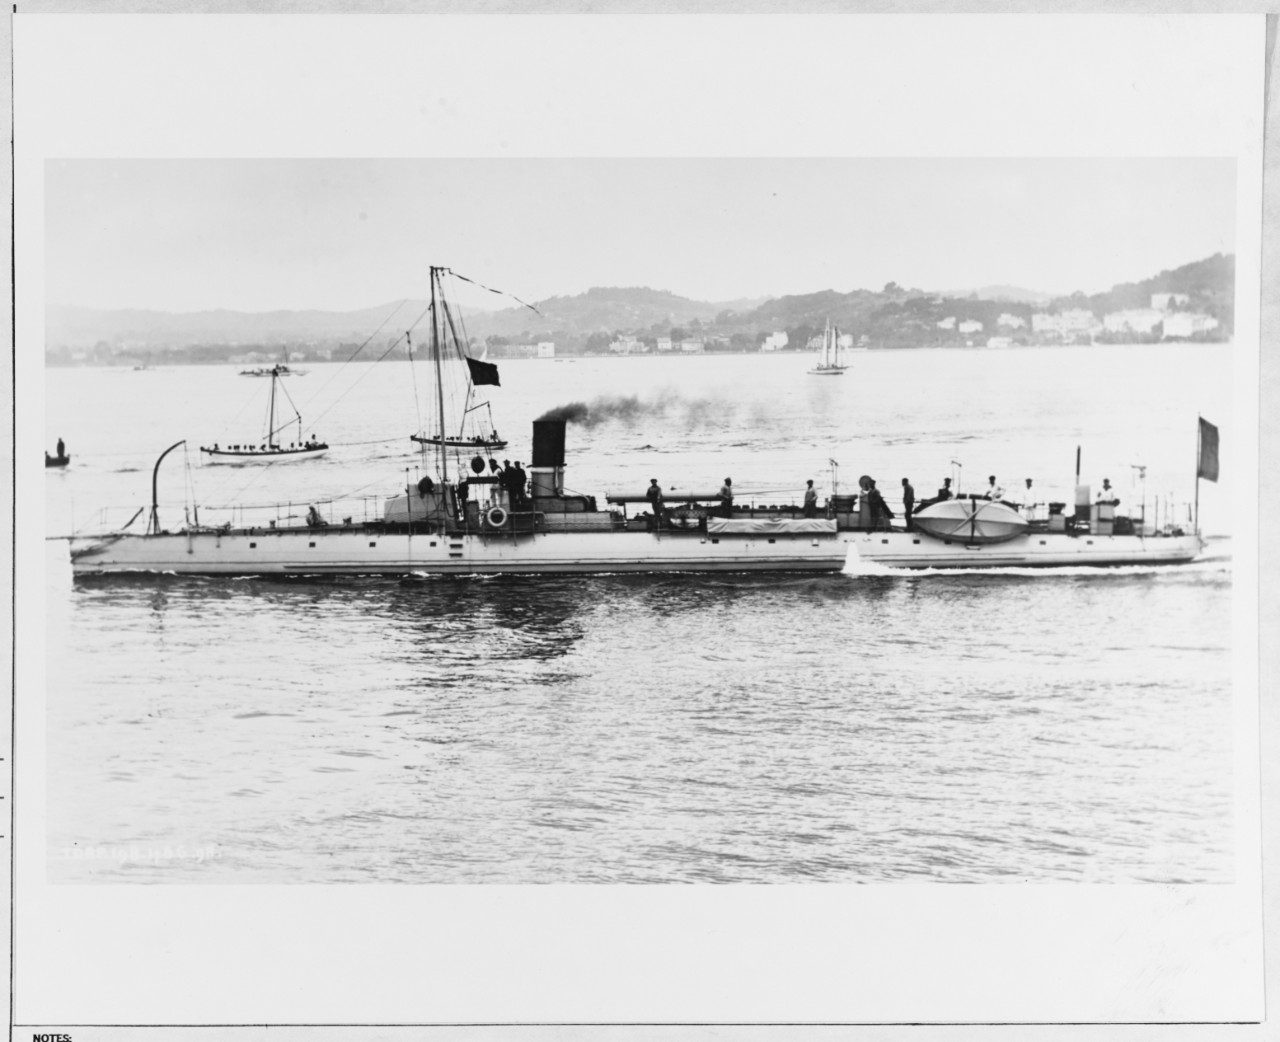 TORPILLEUR 198 (French torpedo boat, 1894)